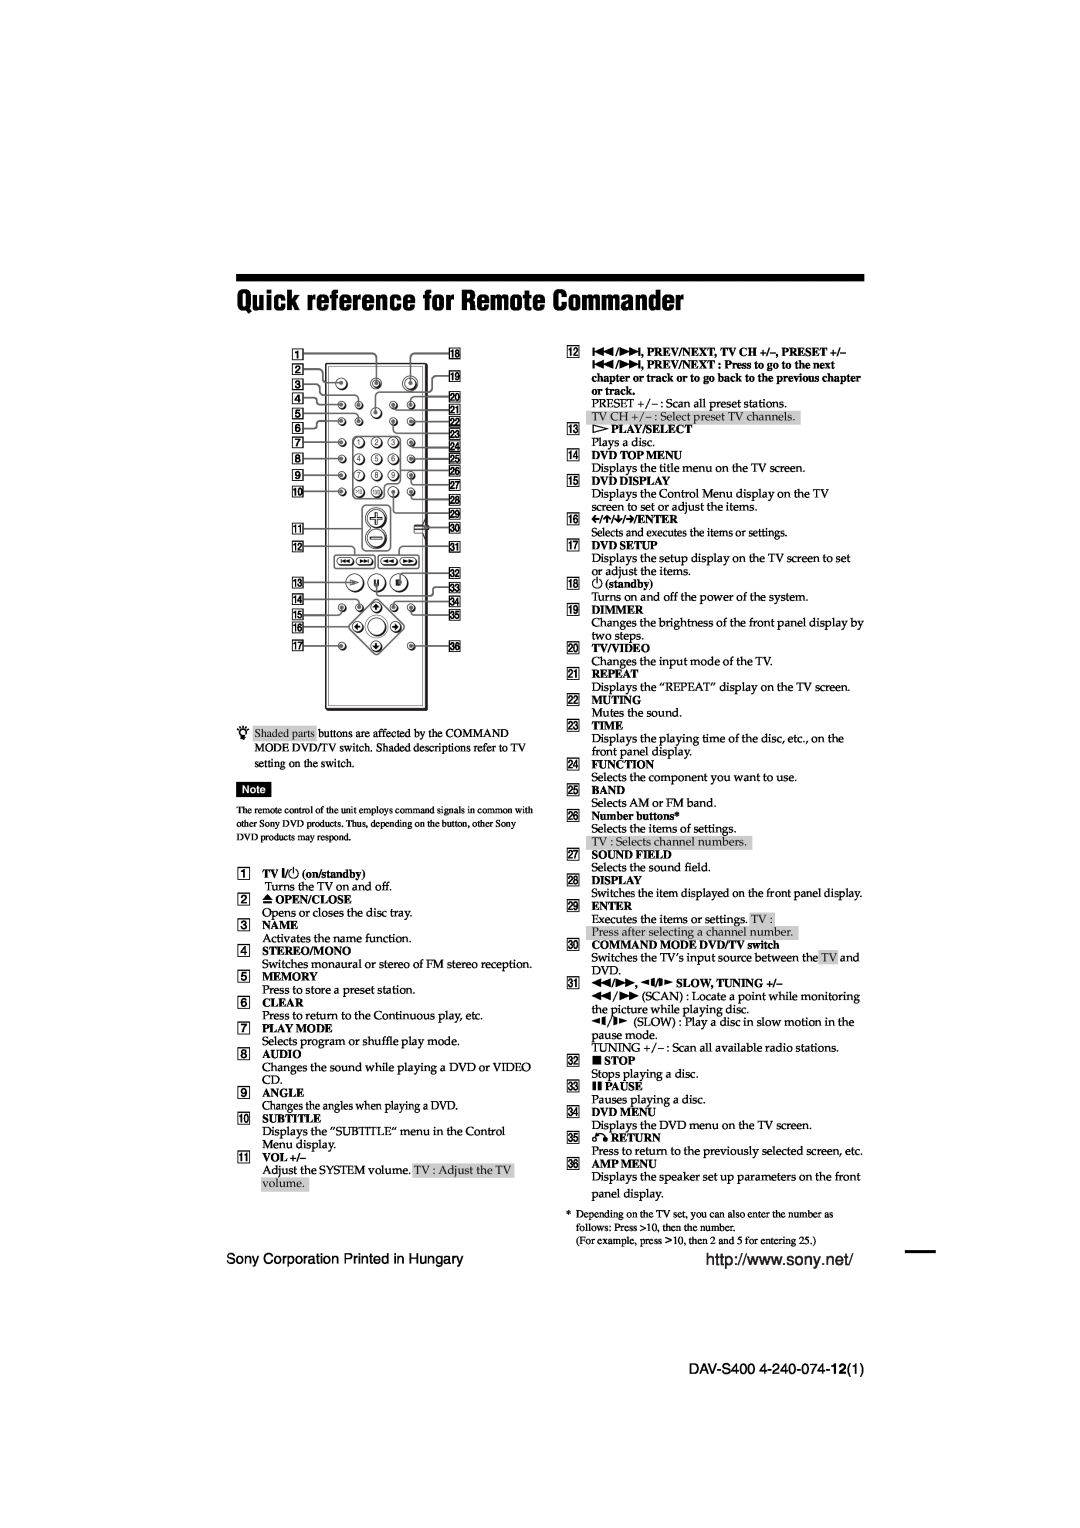 Sony DAV-S400 manual Quick reference for Remote Commander 